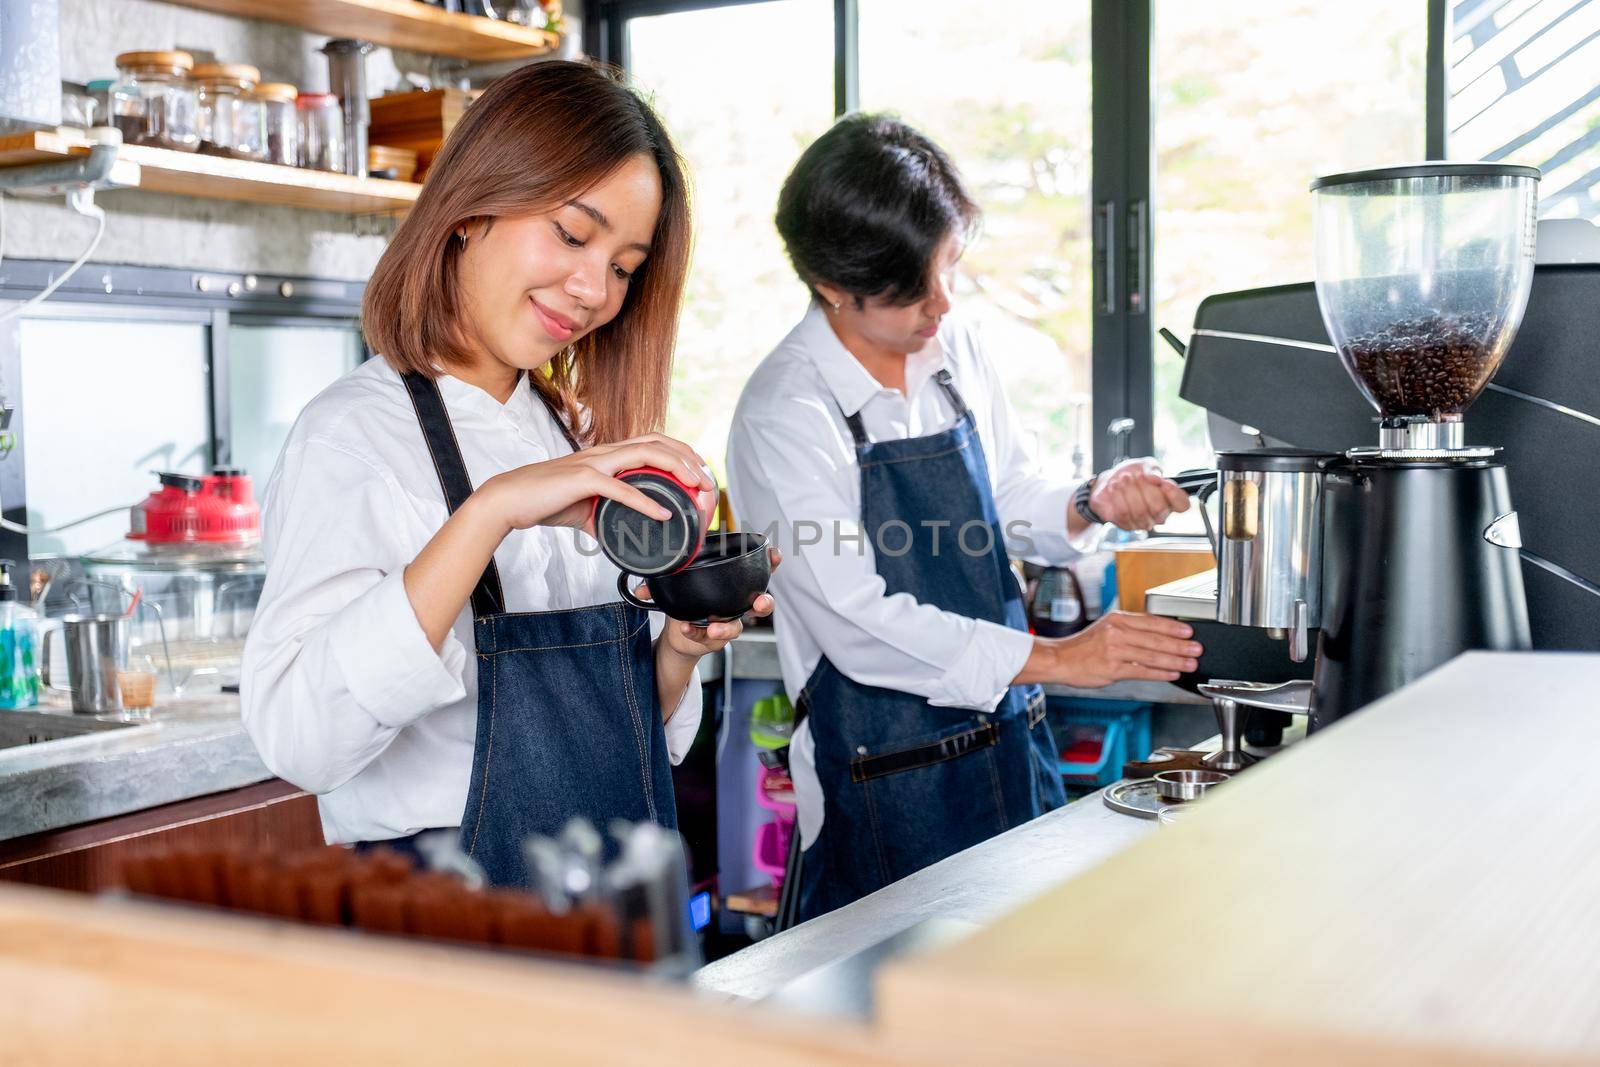 Barista woman or coffee maker pour cream or ingredient to the cup and stand beside of co-worker man in coffee shop. Concept of happy working with small business and sustainable together.